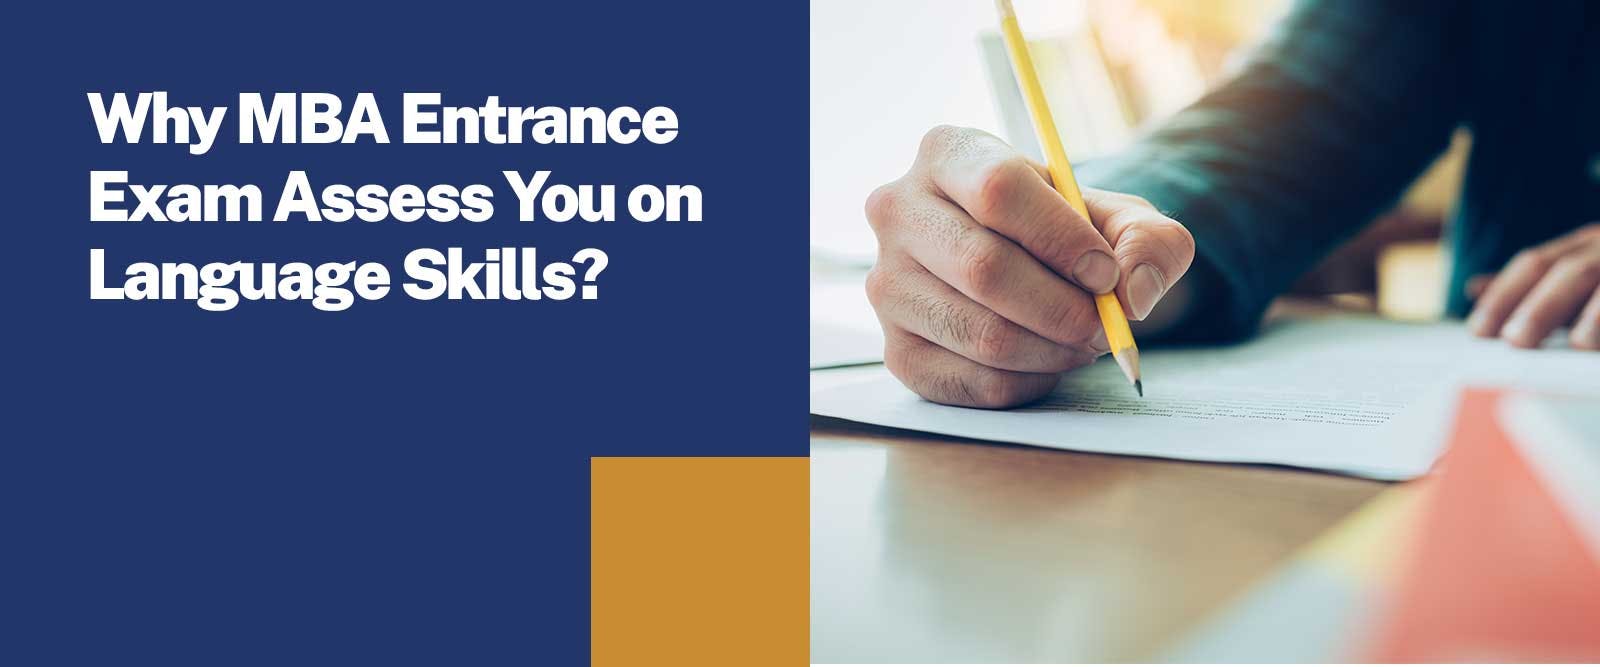 Why Does MBA Entrance Exam Assesses You on Language Skills?